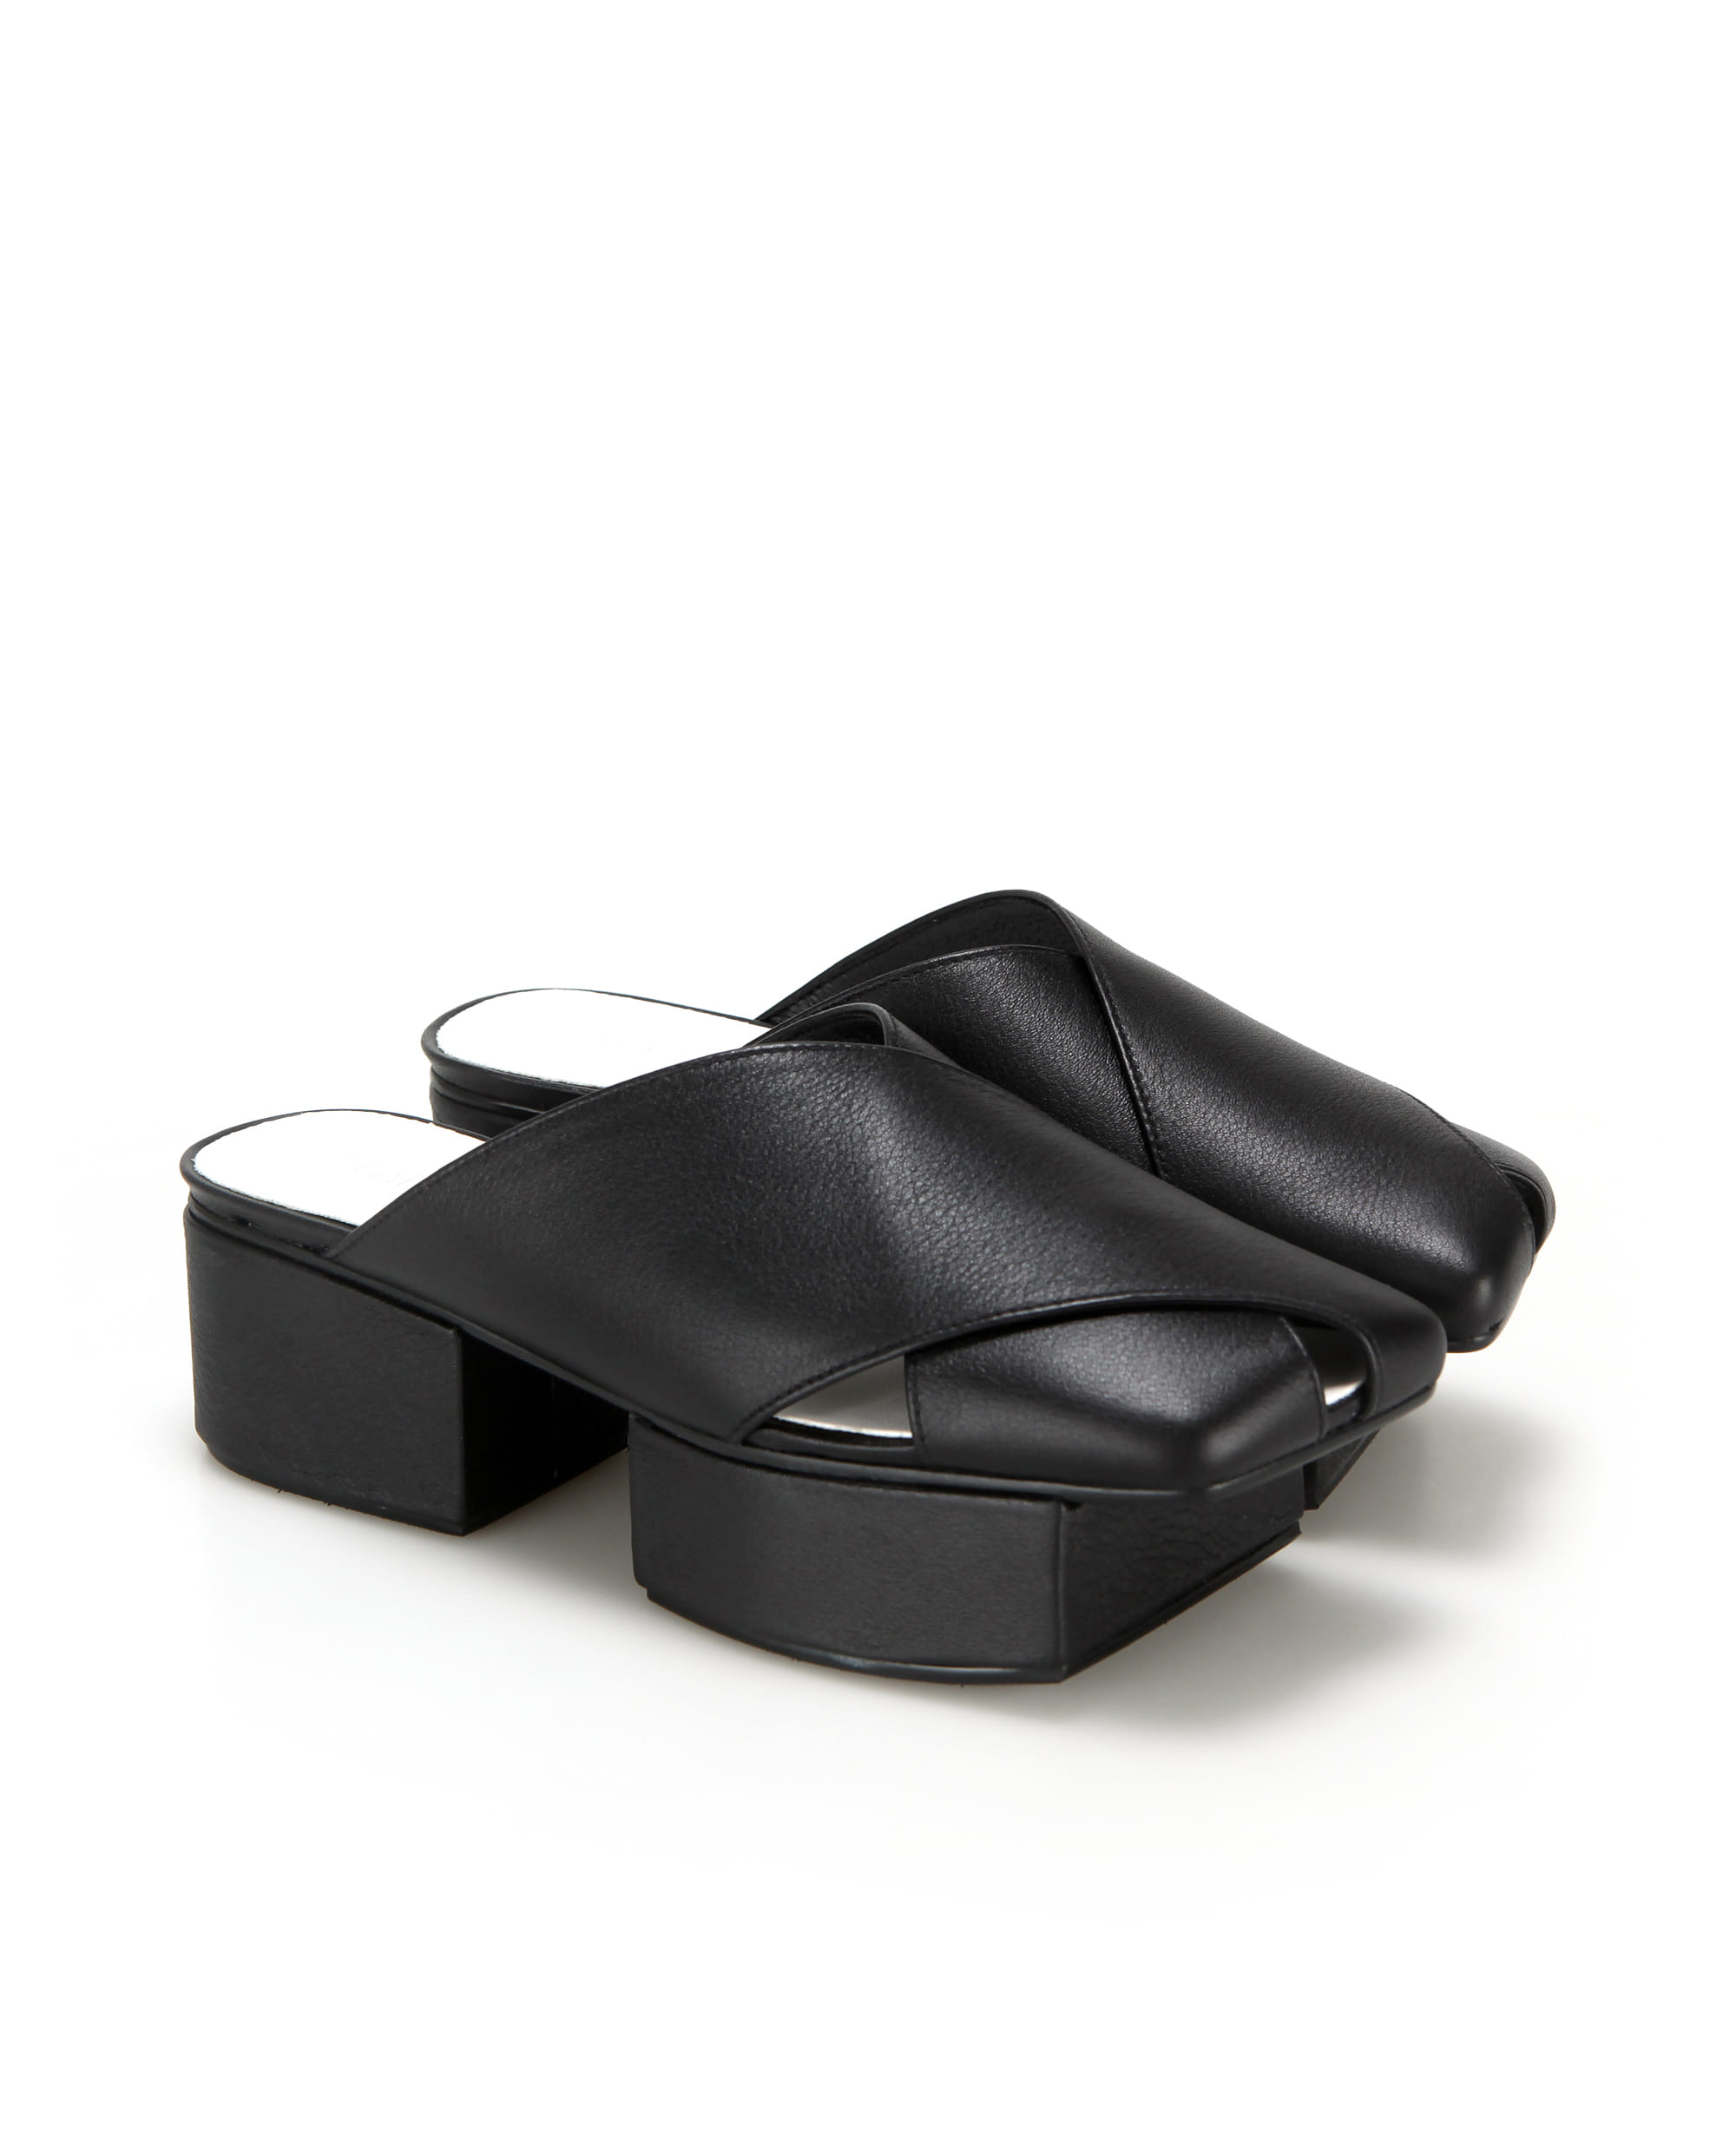 Squared toe crisscross with separated platforms | Black